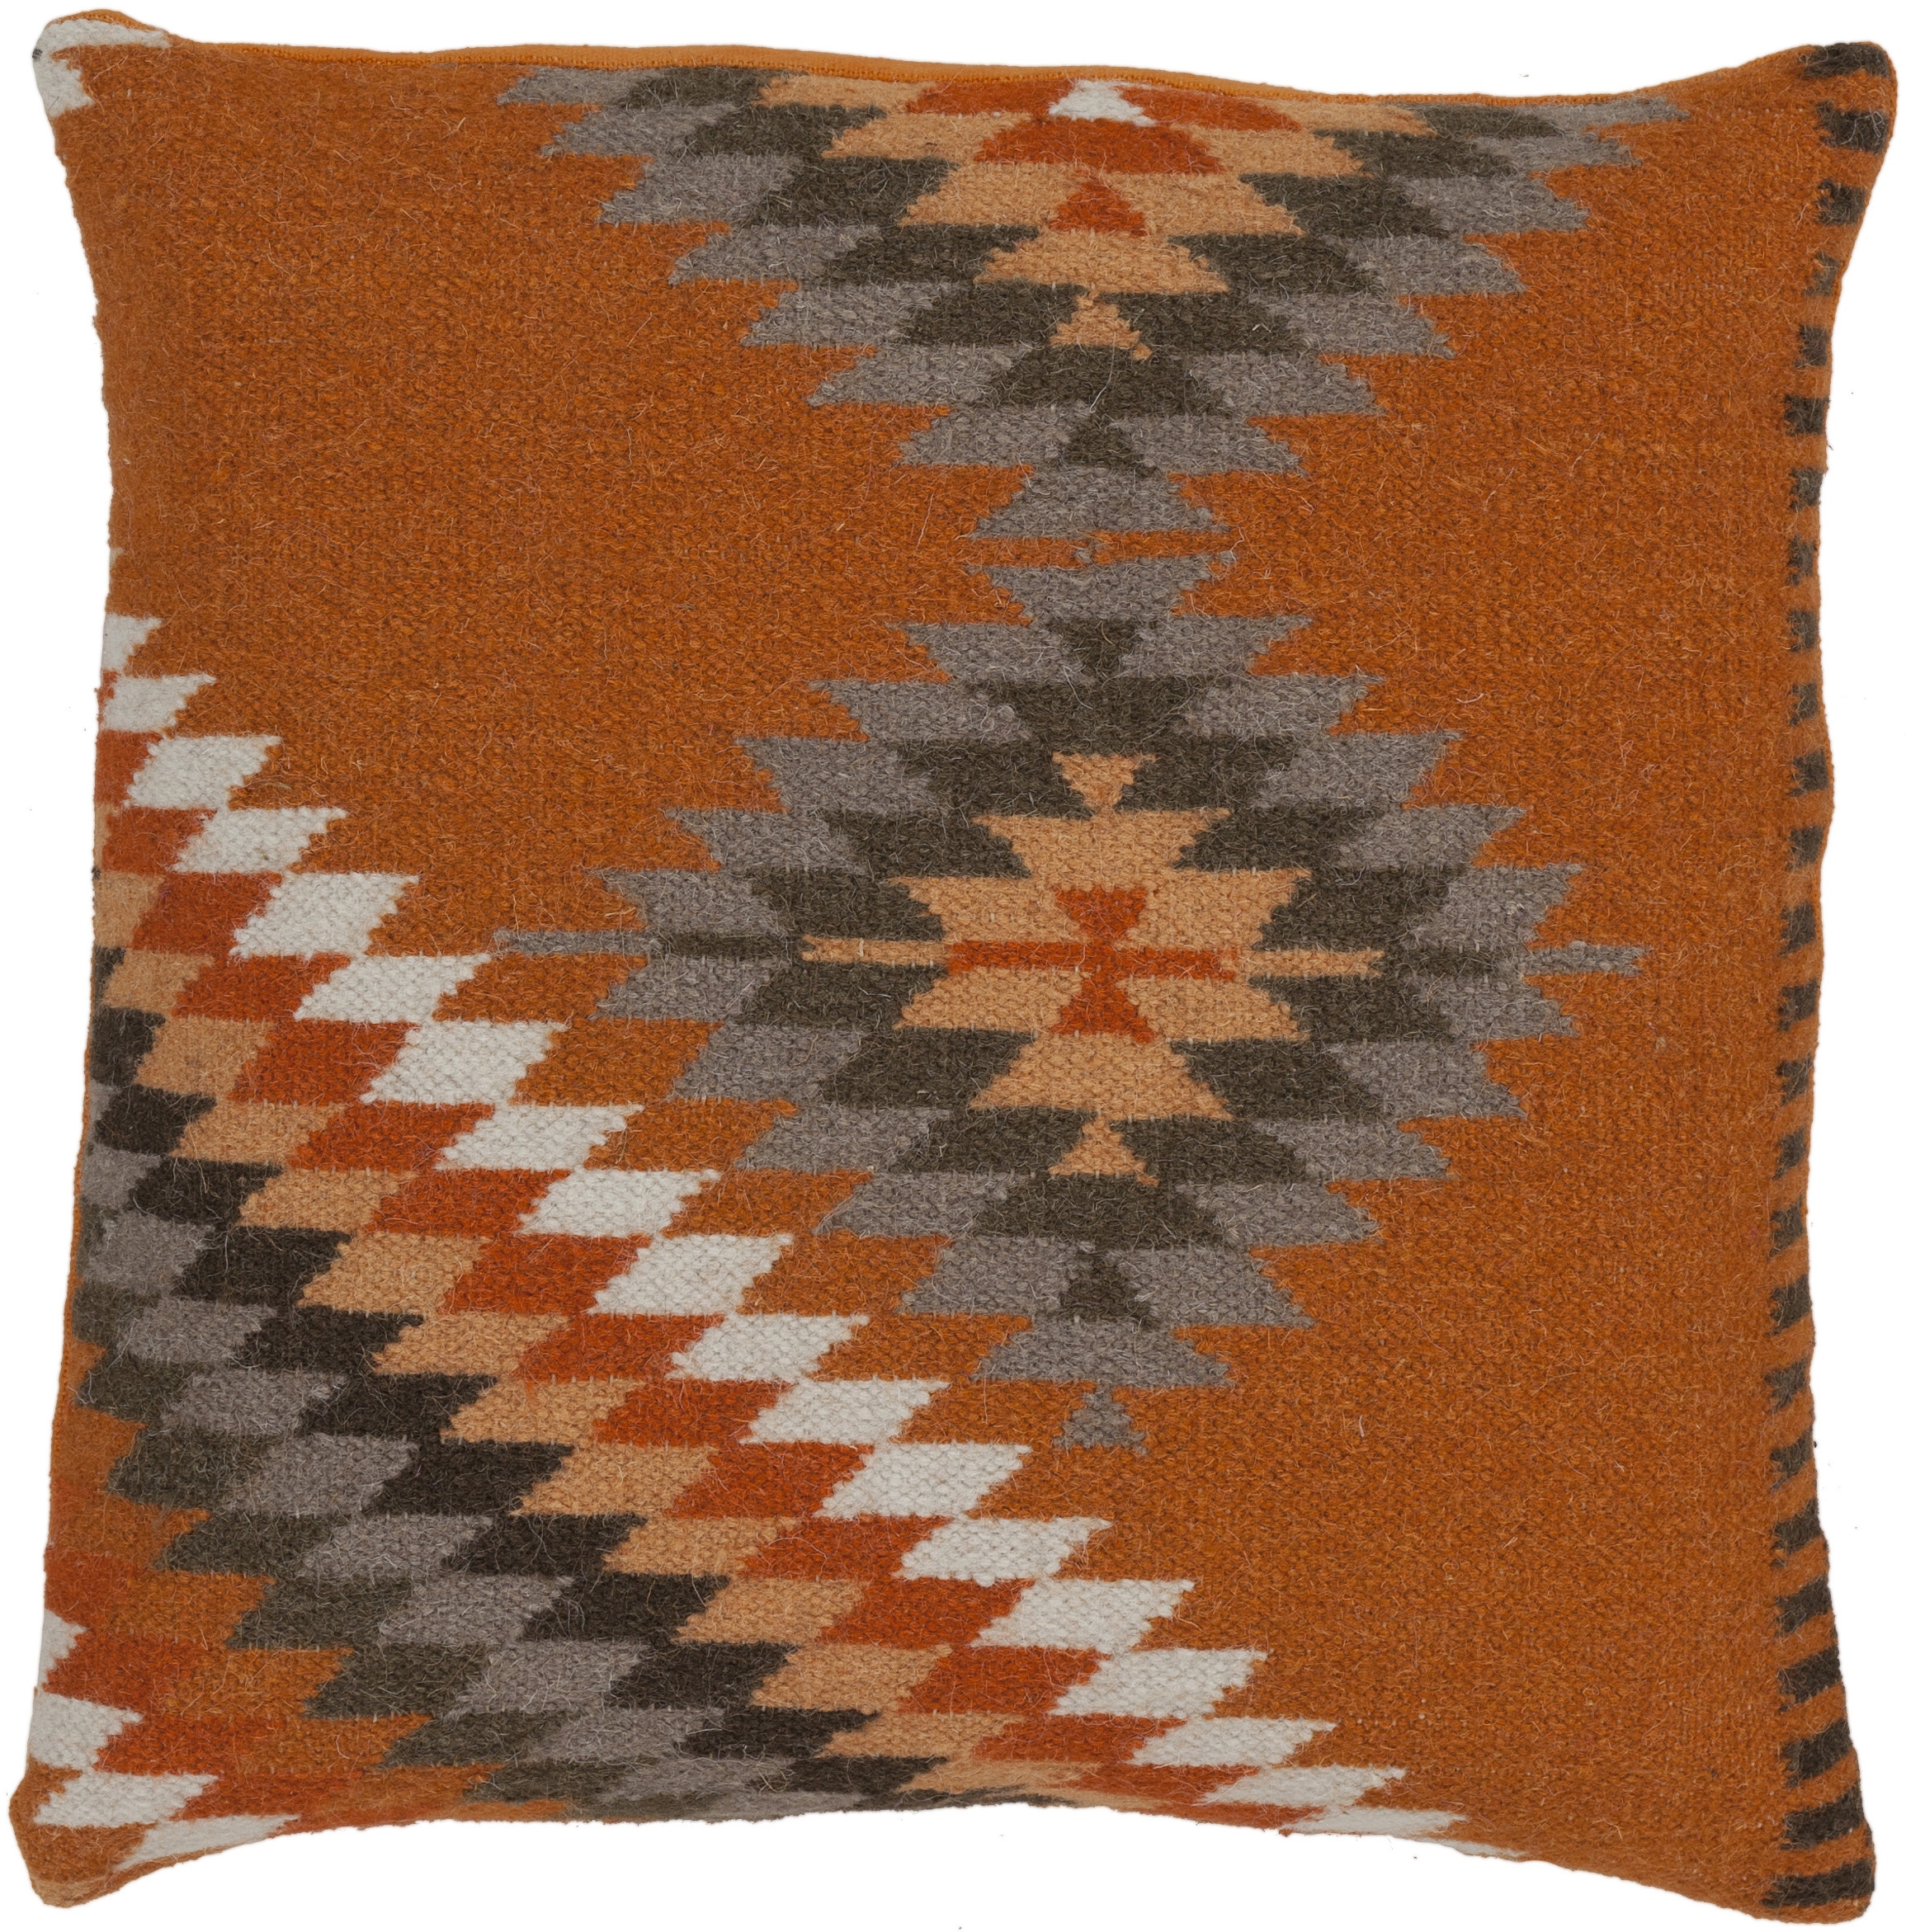 Kilim Throw Pillow, 18" x 18", pillow cover only - Image 0